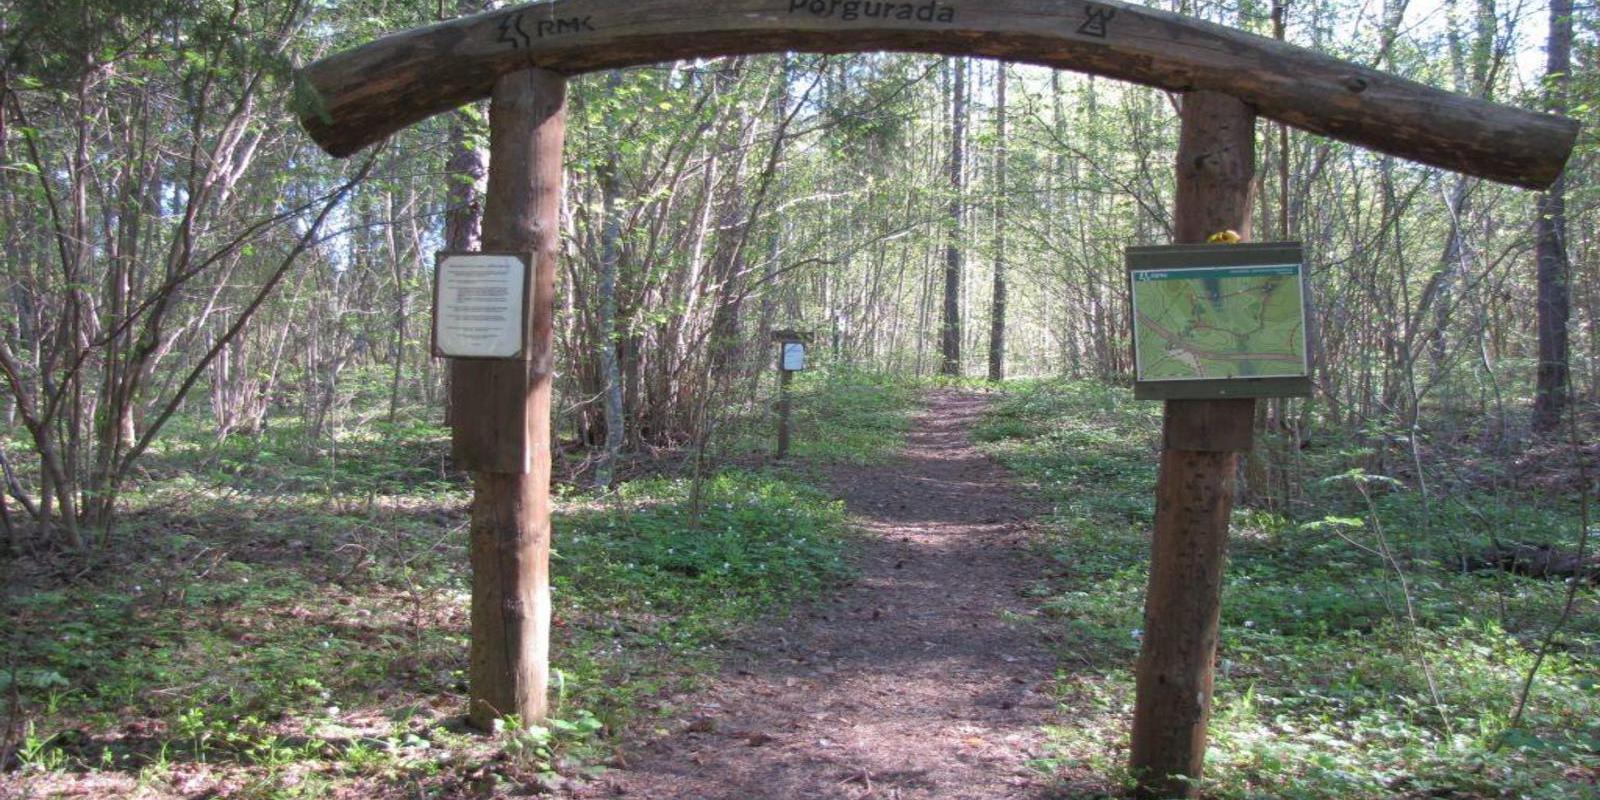 The hiking trail, which is suitable for a pleasant walk, starts on the other side of the road opposite the Voorepalu campfire site and runs along an e